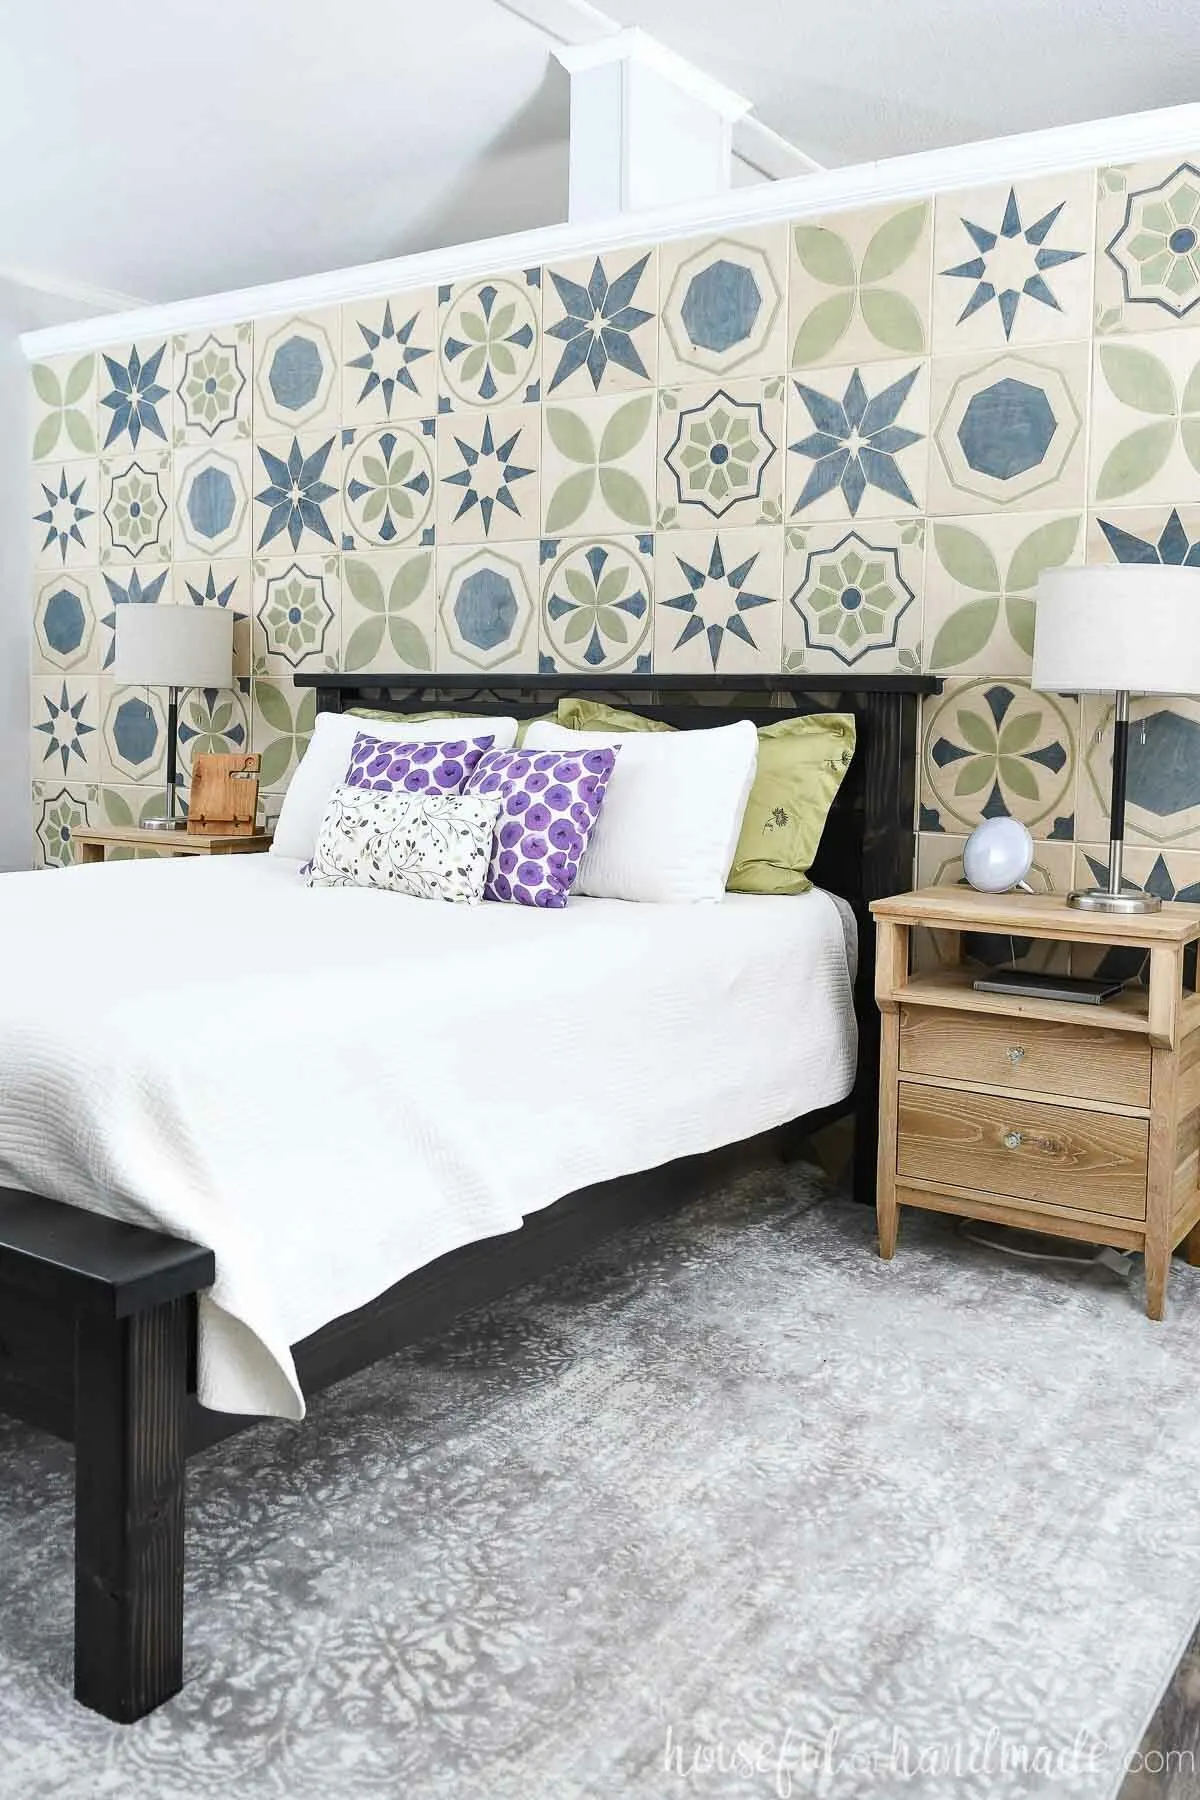 Bedroom accent wall of patterned tiles carved with a CNC machine. 